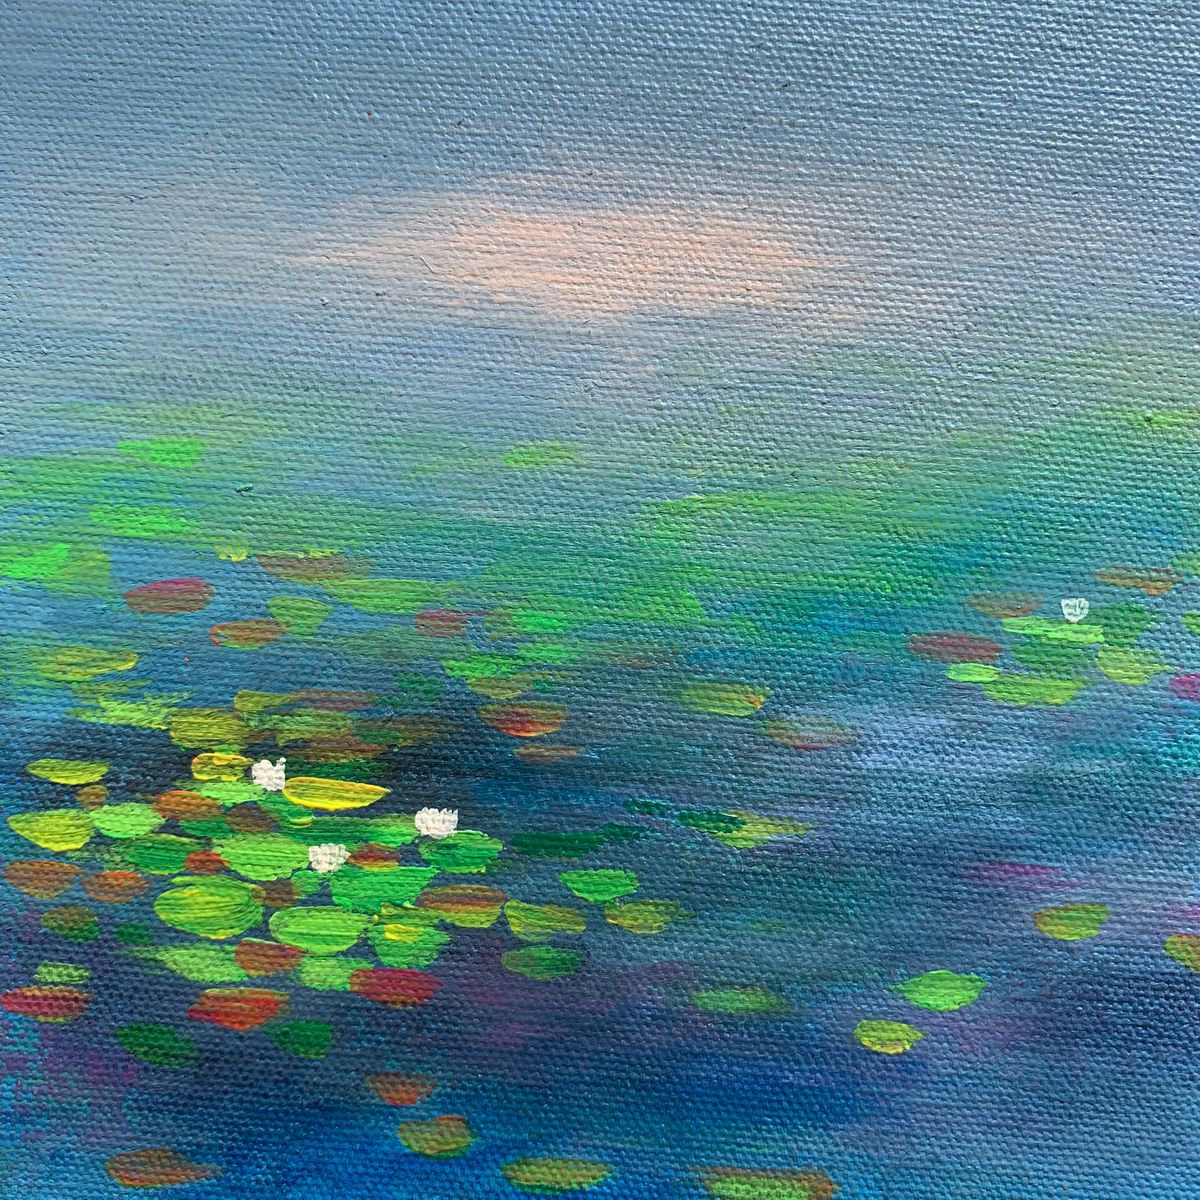 Midnight lilies! Miniature painting by Amita Dand